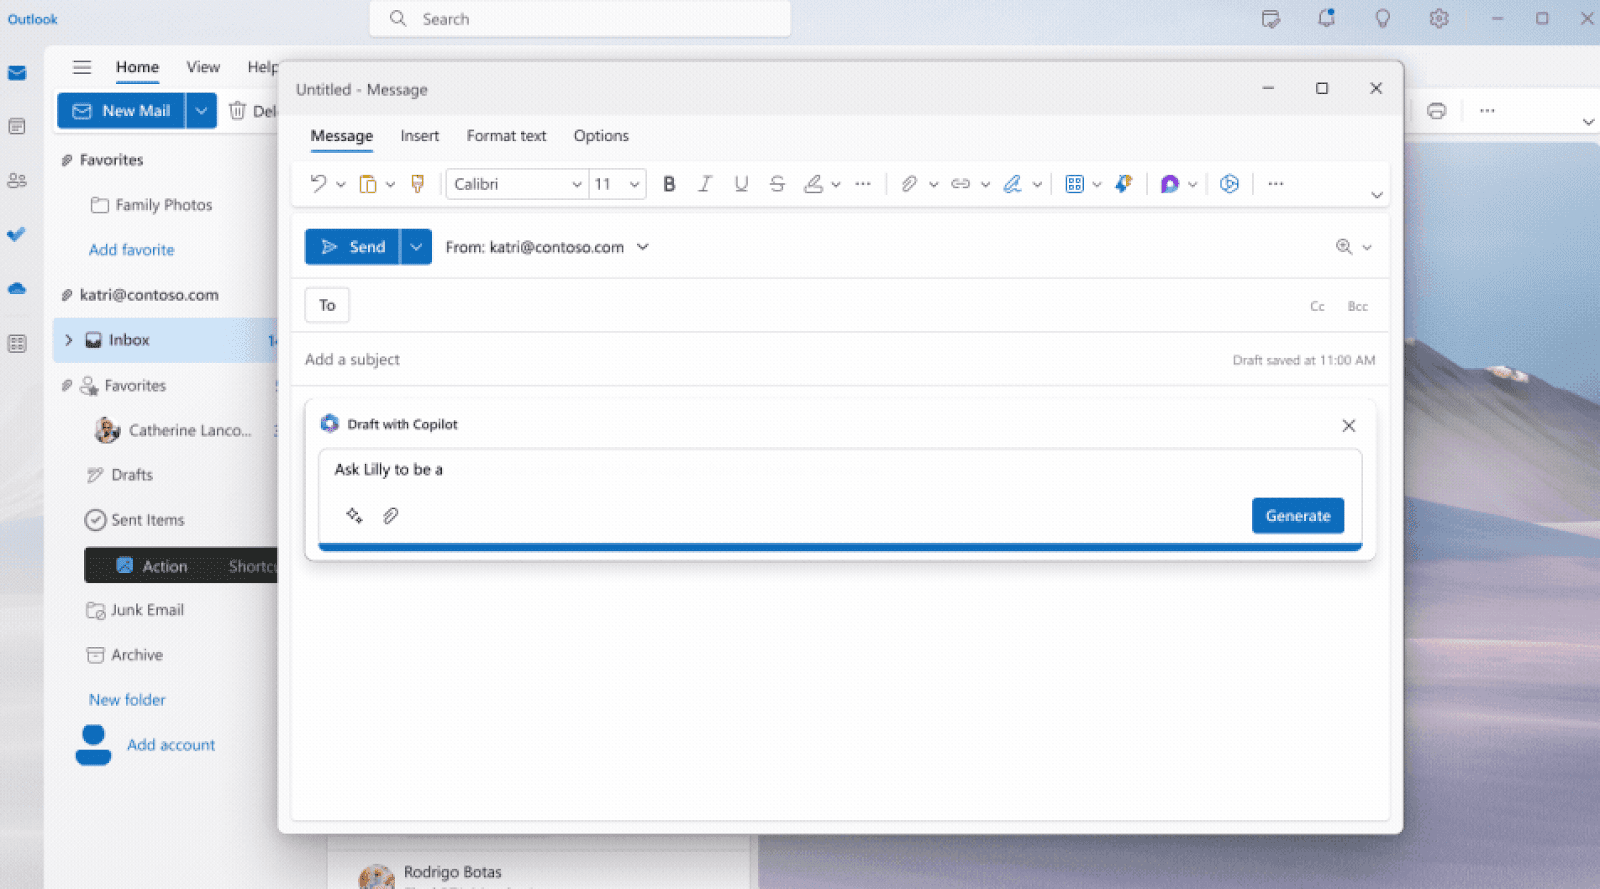 How do I enable copilot in Outlook?